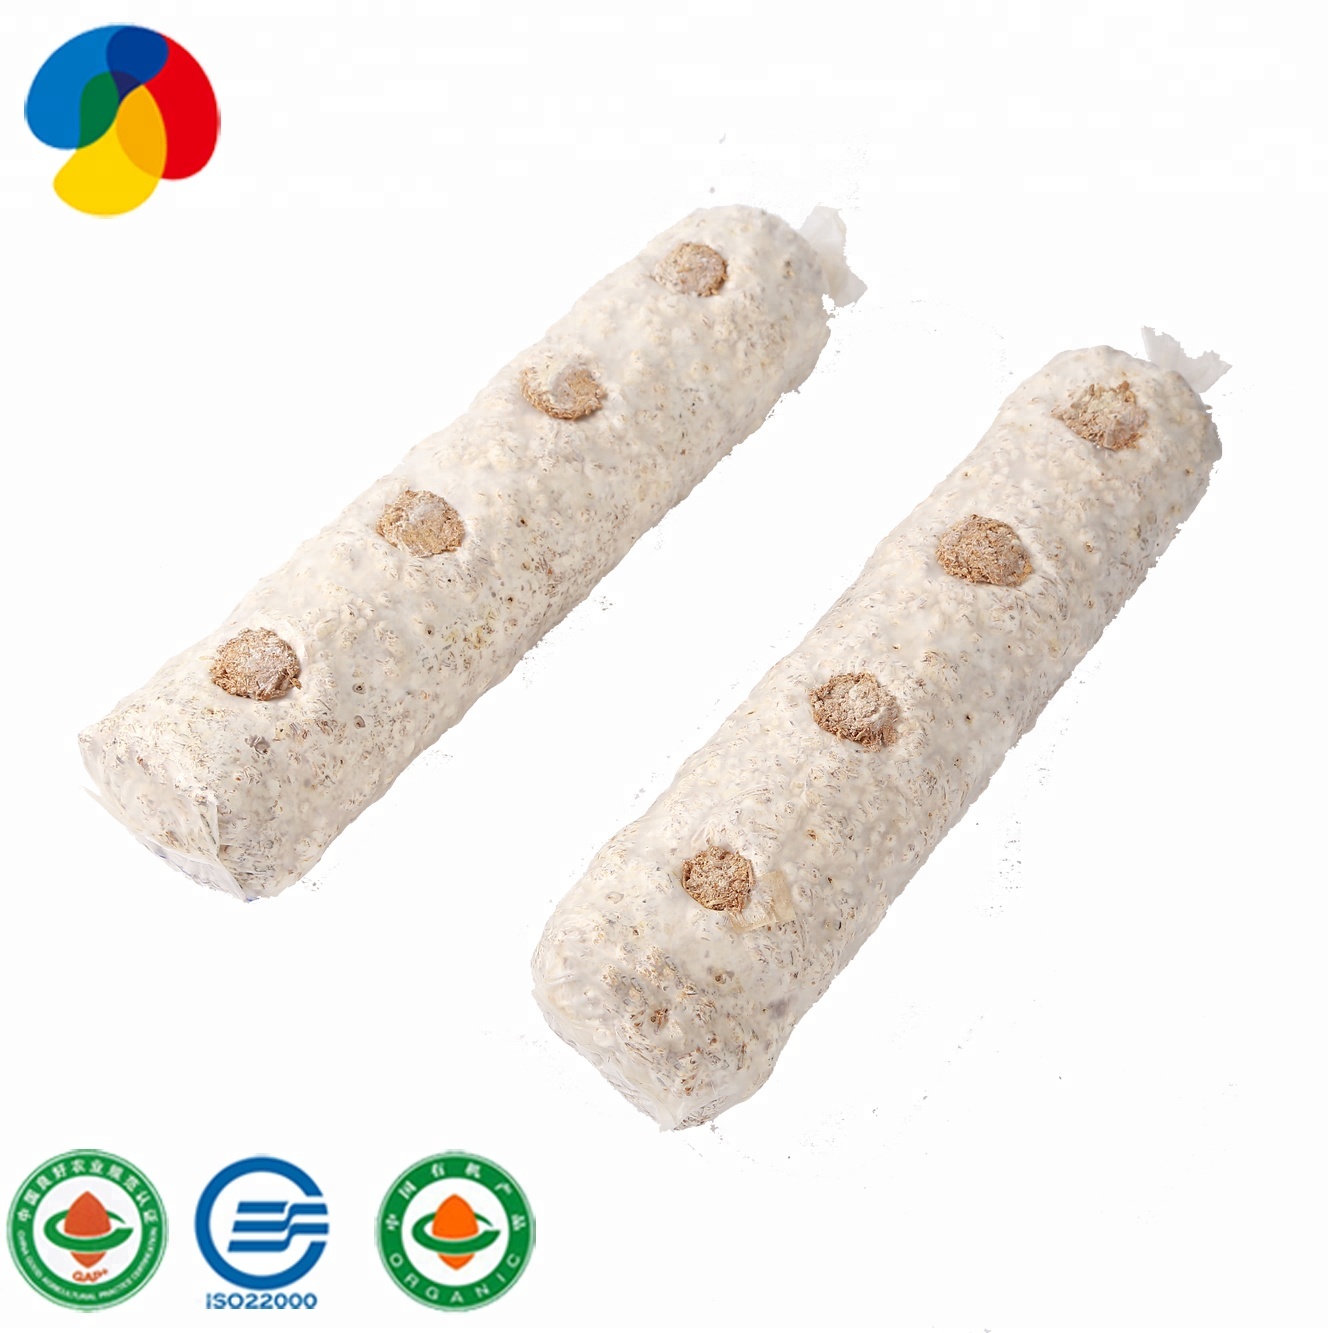 Super Lowest Price Export Flower Shiitake Mushroom Dried From Fresh Raw Material